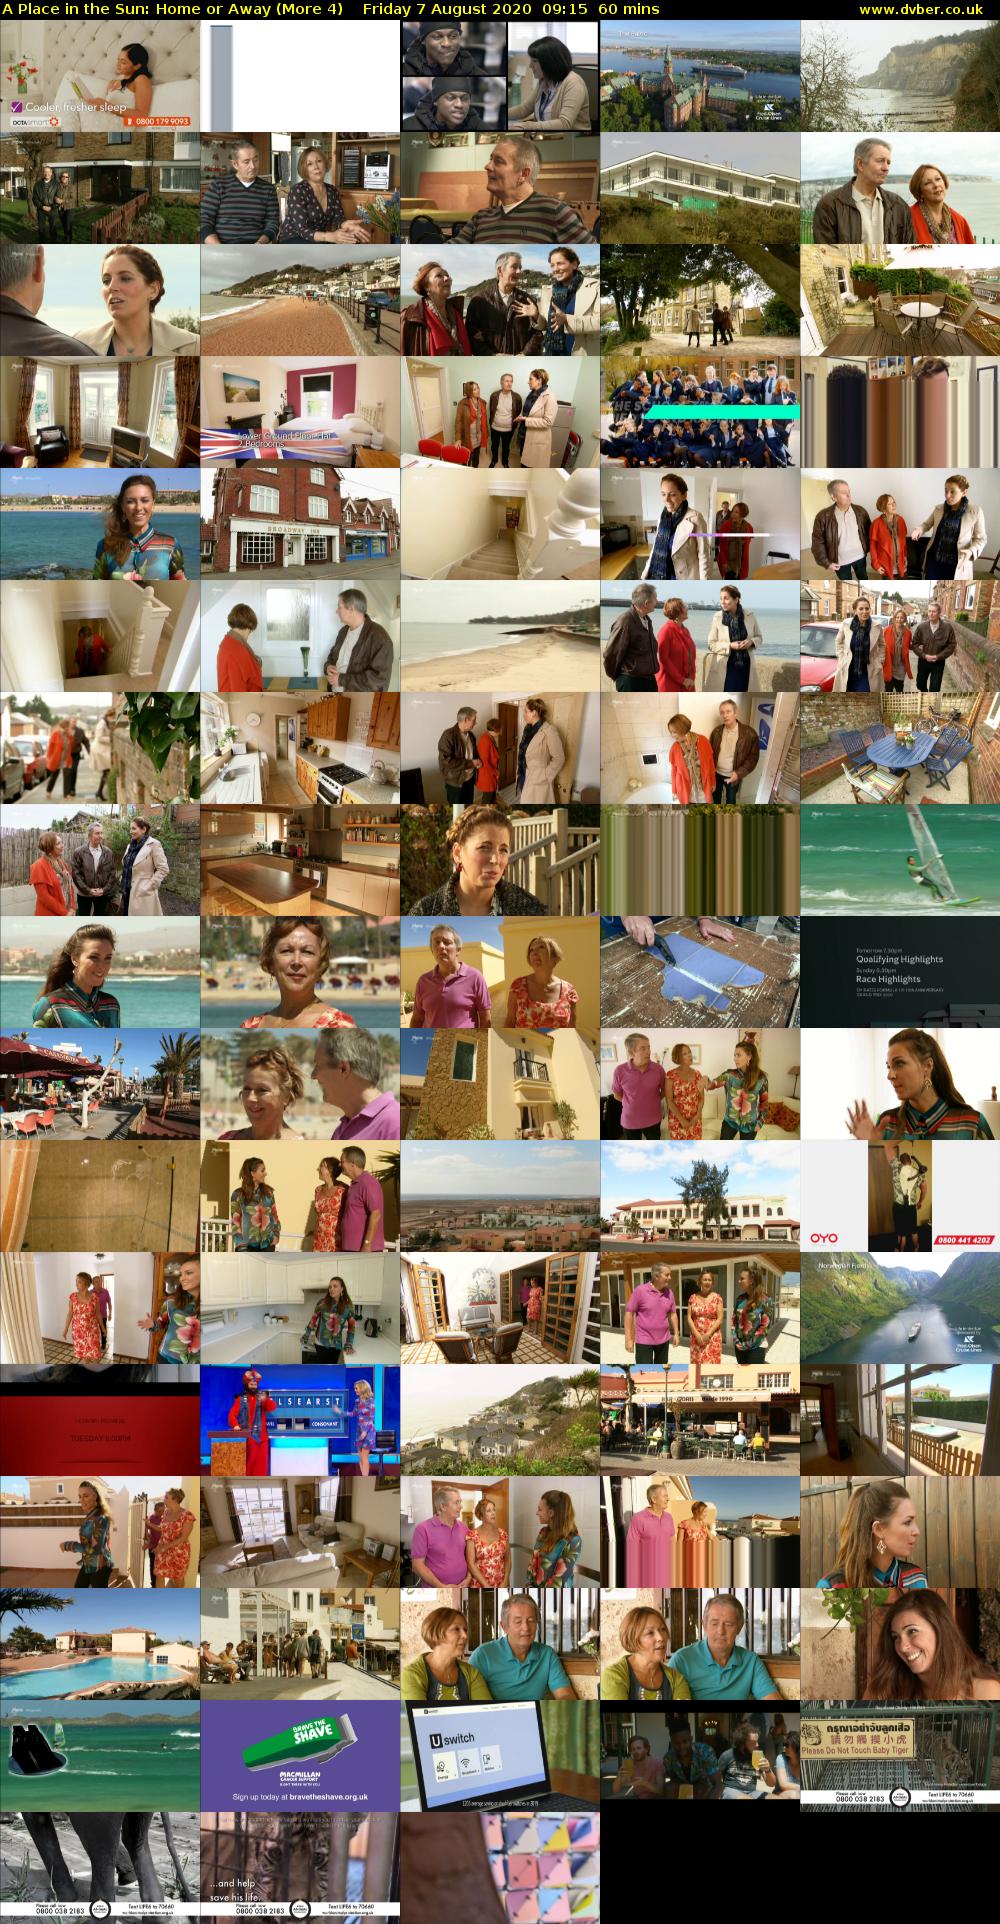 A Place in the Sun: Home or Away (More 4) Friday 7 August 2020 09:15 - 10:15